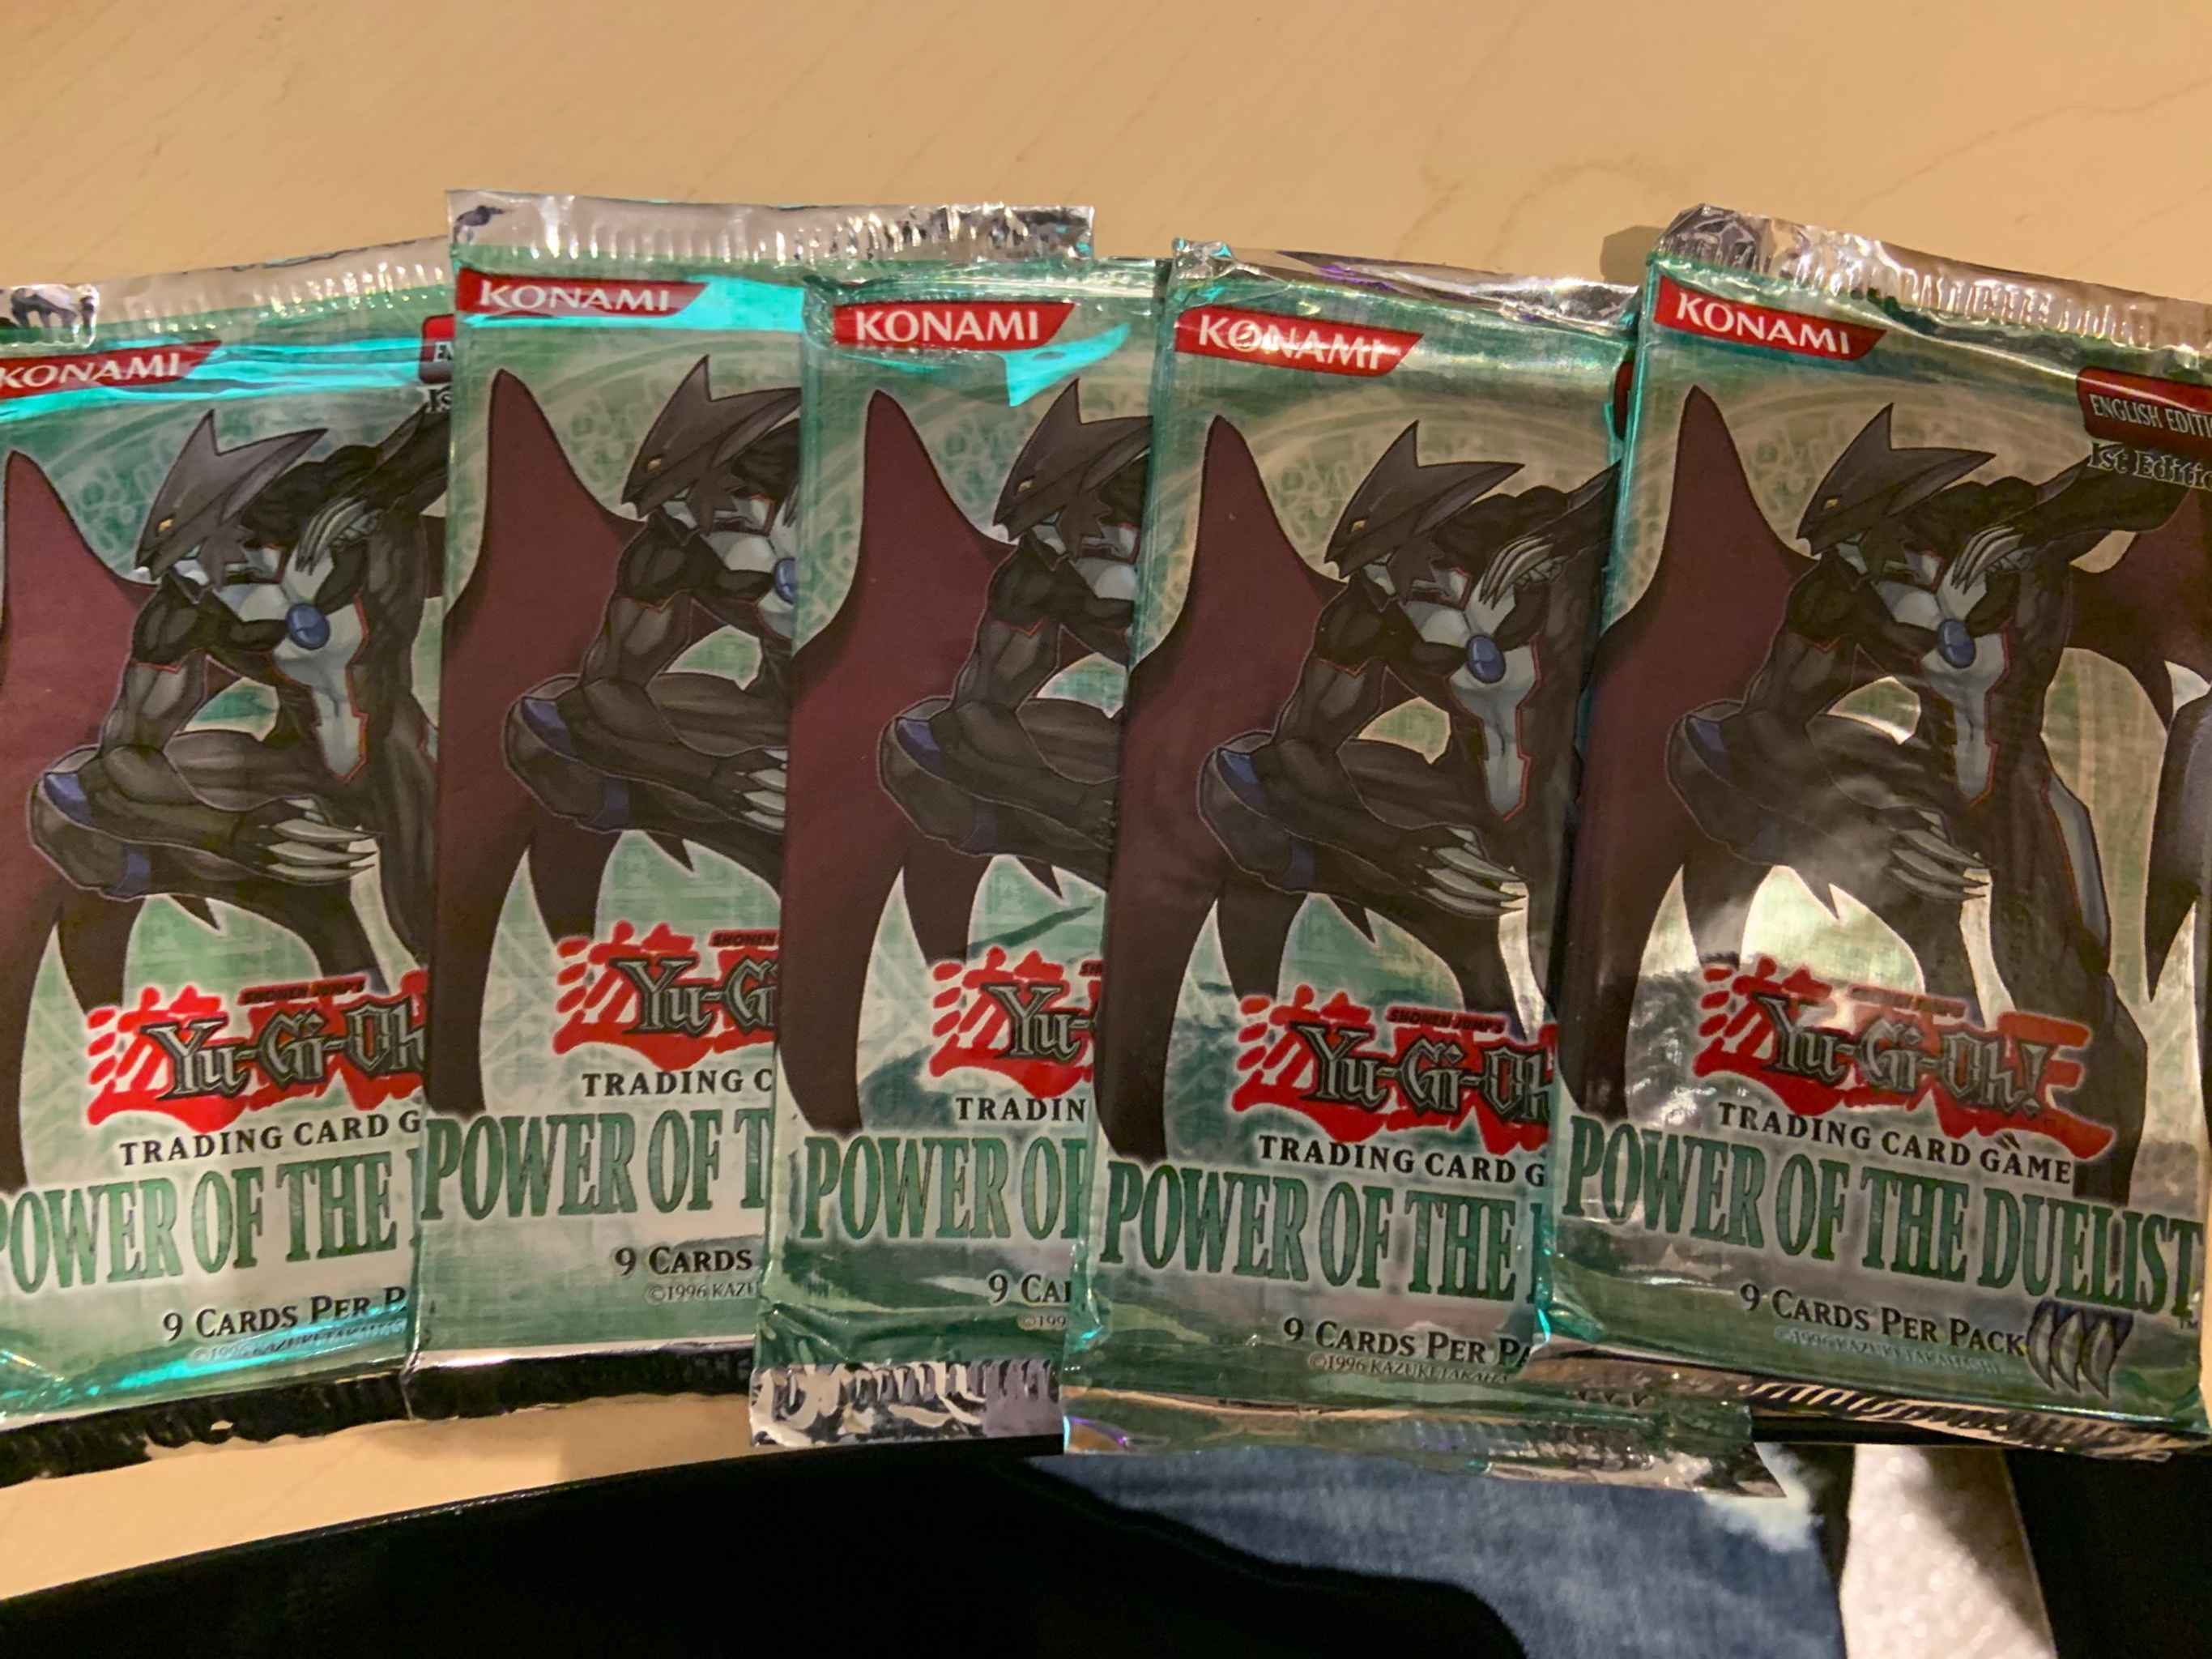 Power of the Duelist 1st Edition Booster POTD Yugioh 